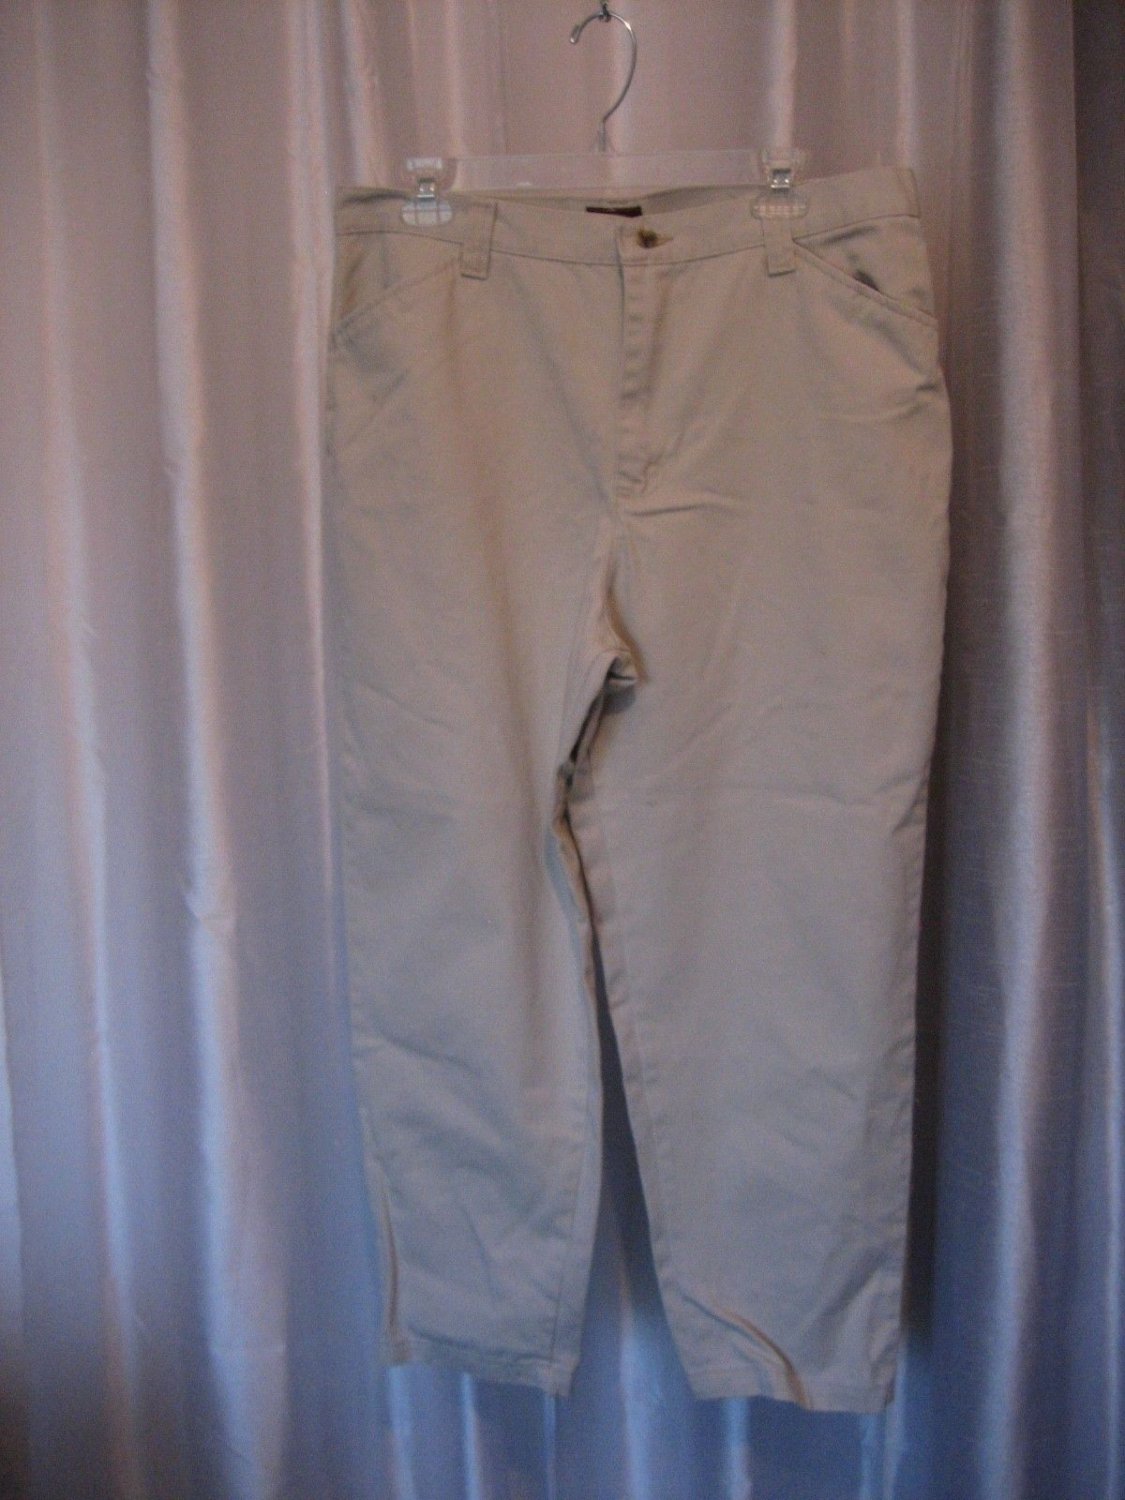 Riders Casuals Women's Bone Colored Long Pants 100% Cotton Sz 16P Pre-Owned